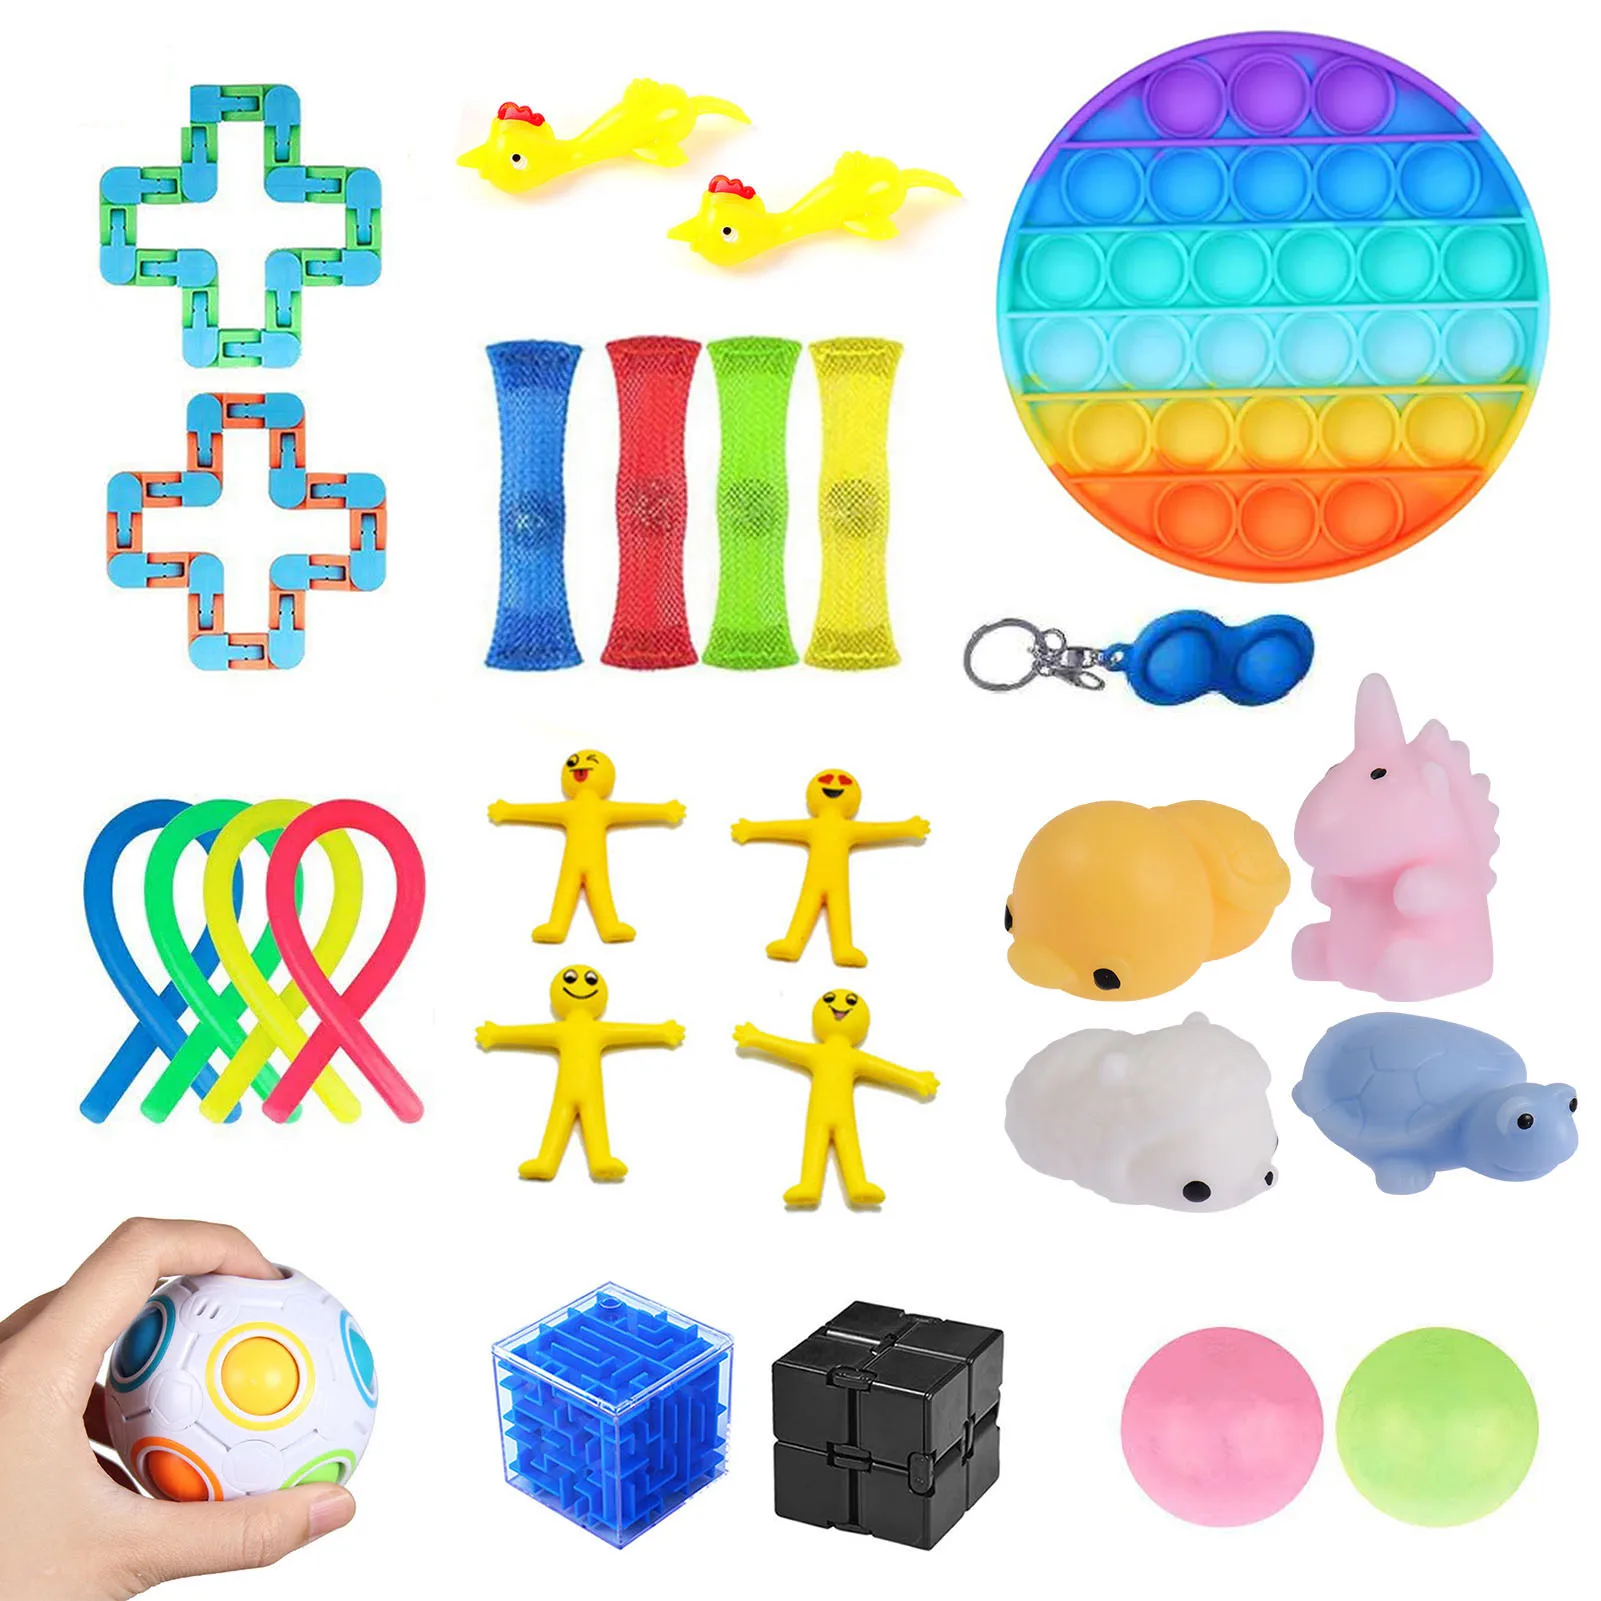 New Fidget Sensory Toy Set Stress Relief Toys Autism Anxiety Relief Stress Pop Bubble Funny Toy For Kids Adults enlarge